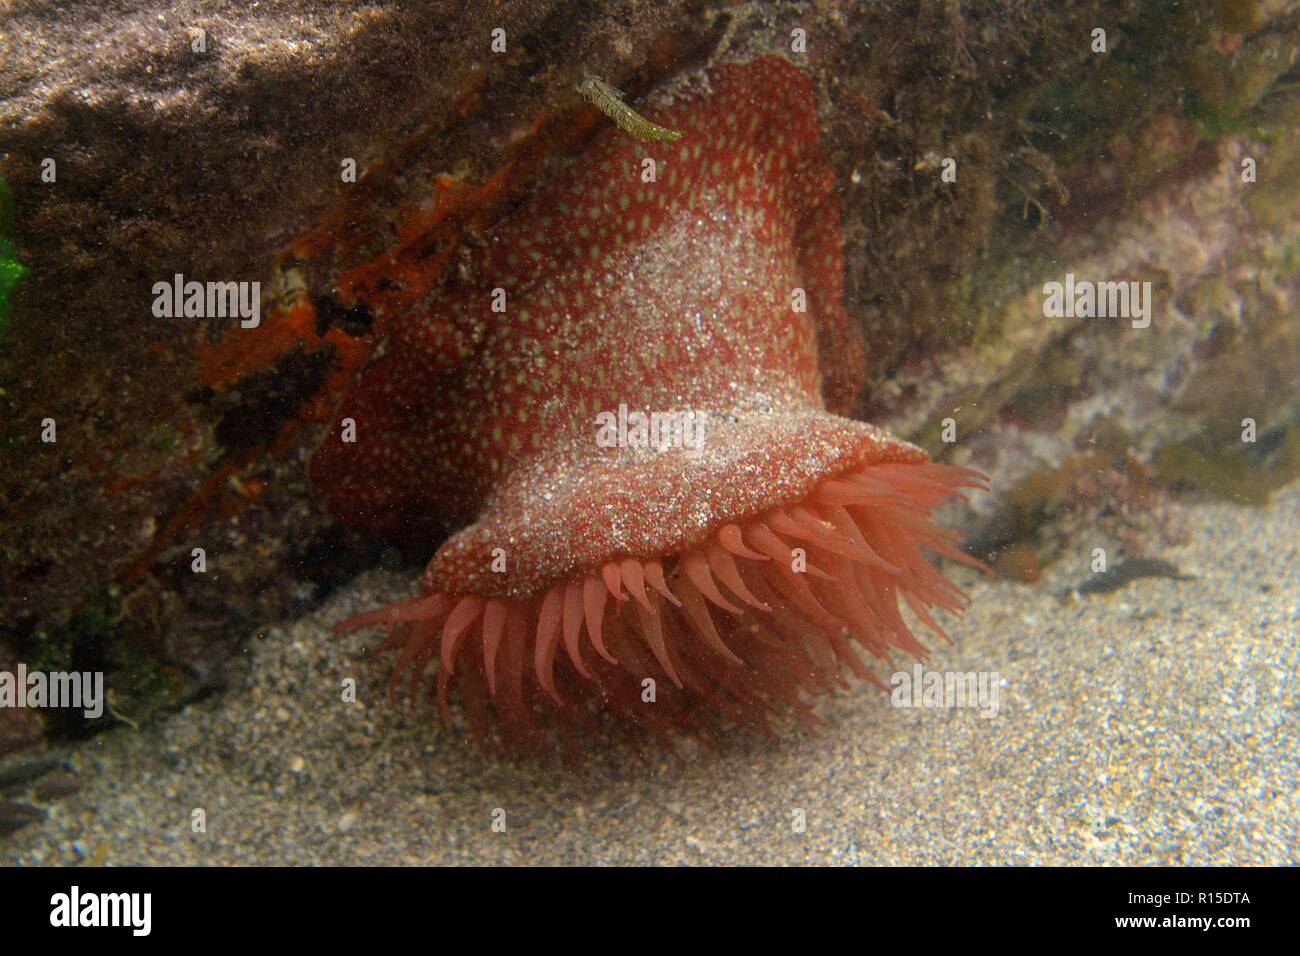 Strawberry anemone (Actinia fragracea) with tentacles spread underwater to catch prey wafted past in currents on a rocky shore, Devon. UK Stock Photo